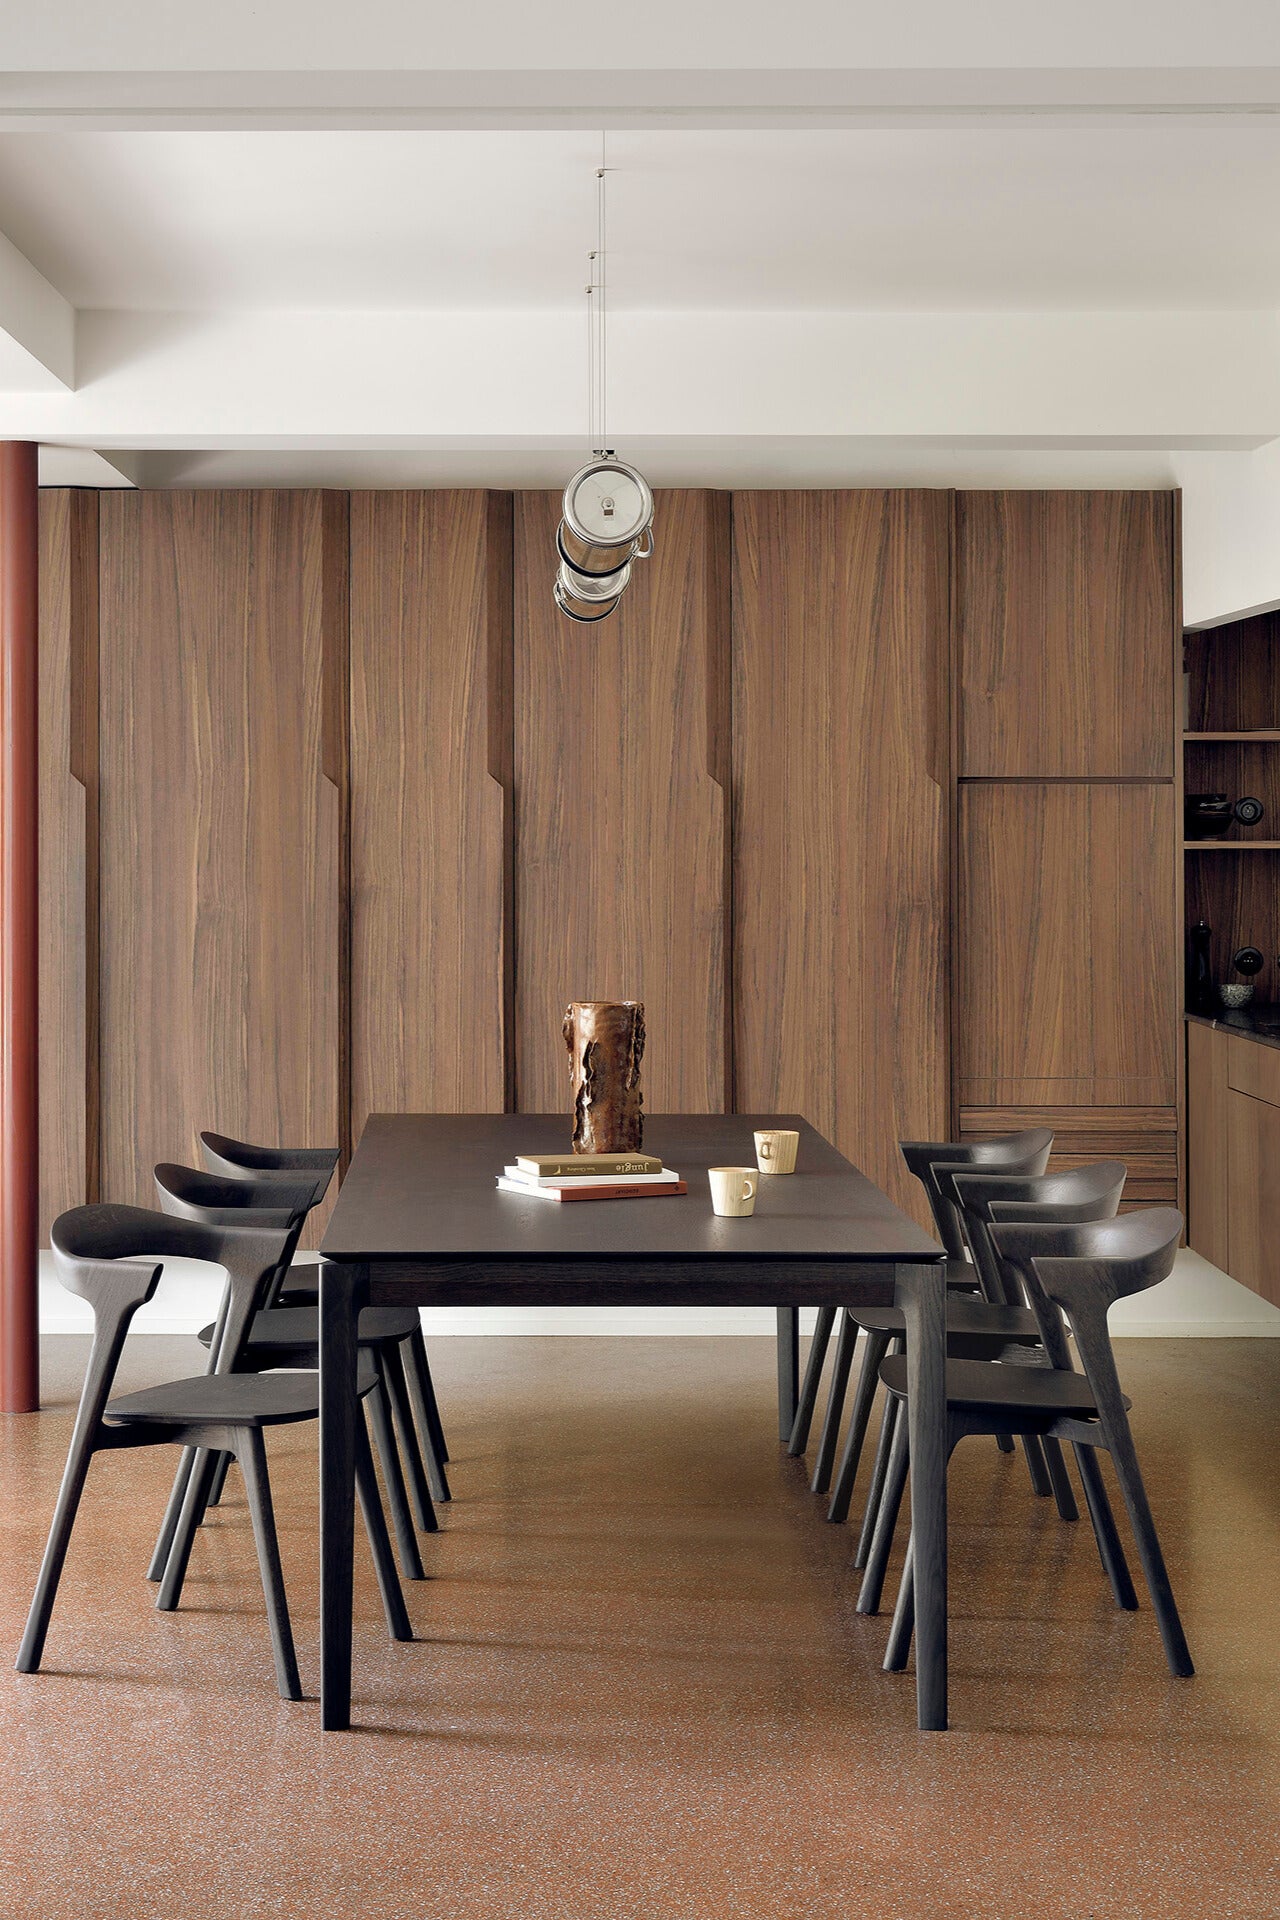 Bok Dining Table Brown Oak in interior setting with the bok dining chairs